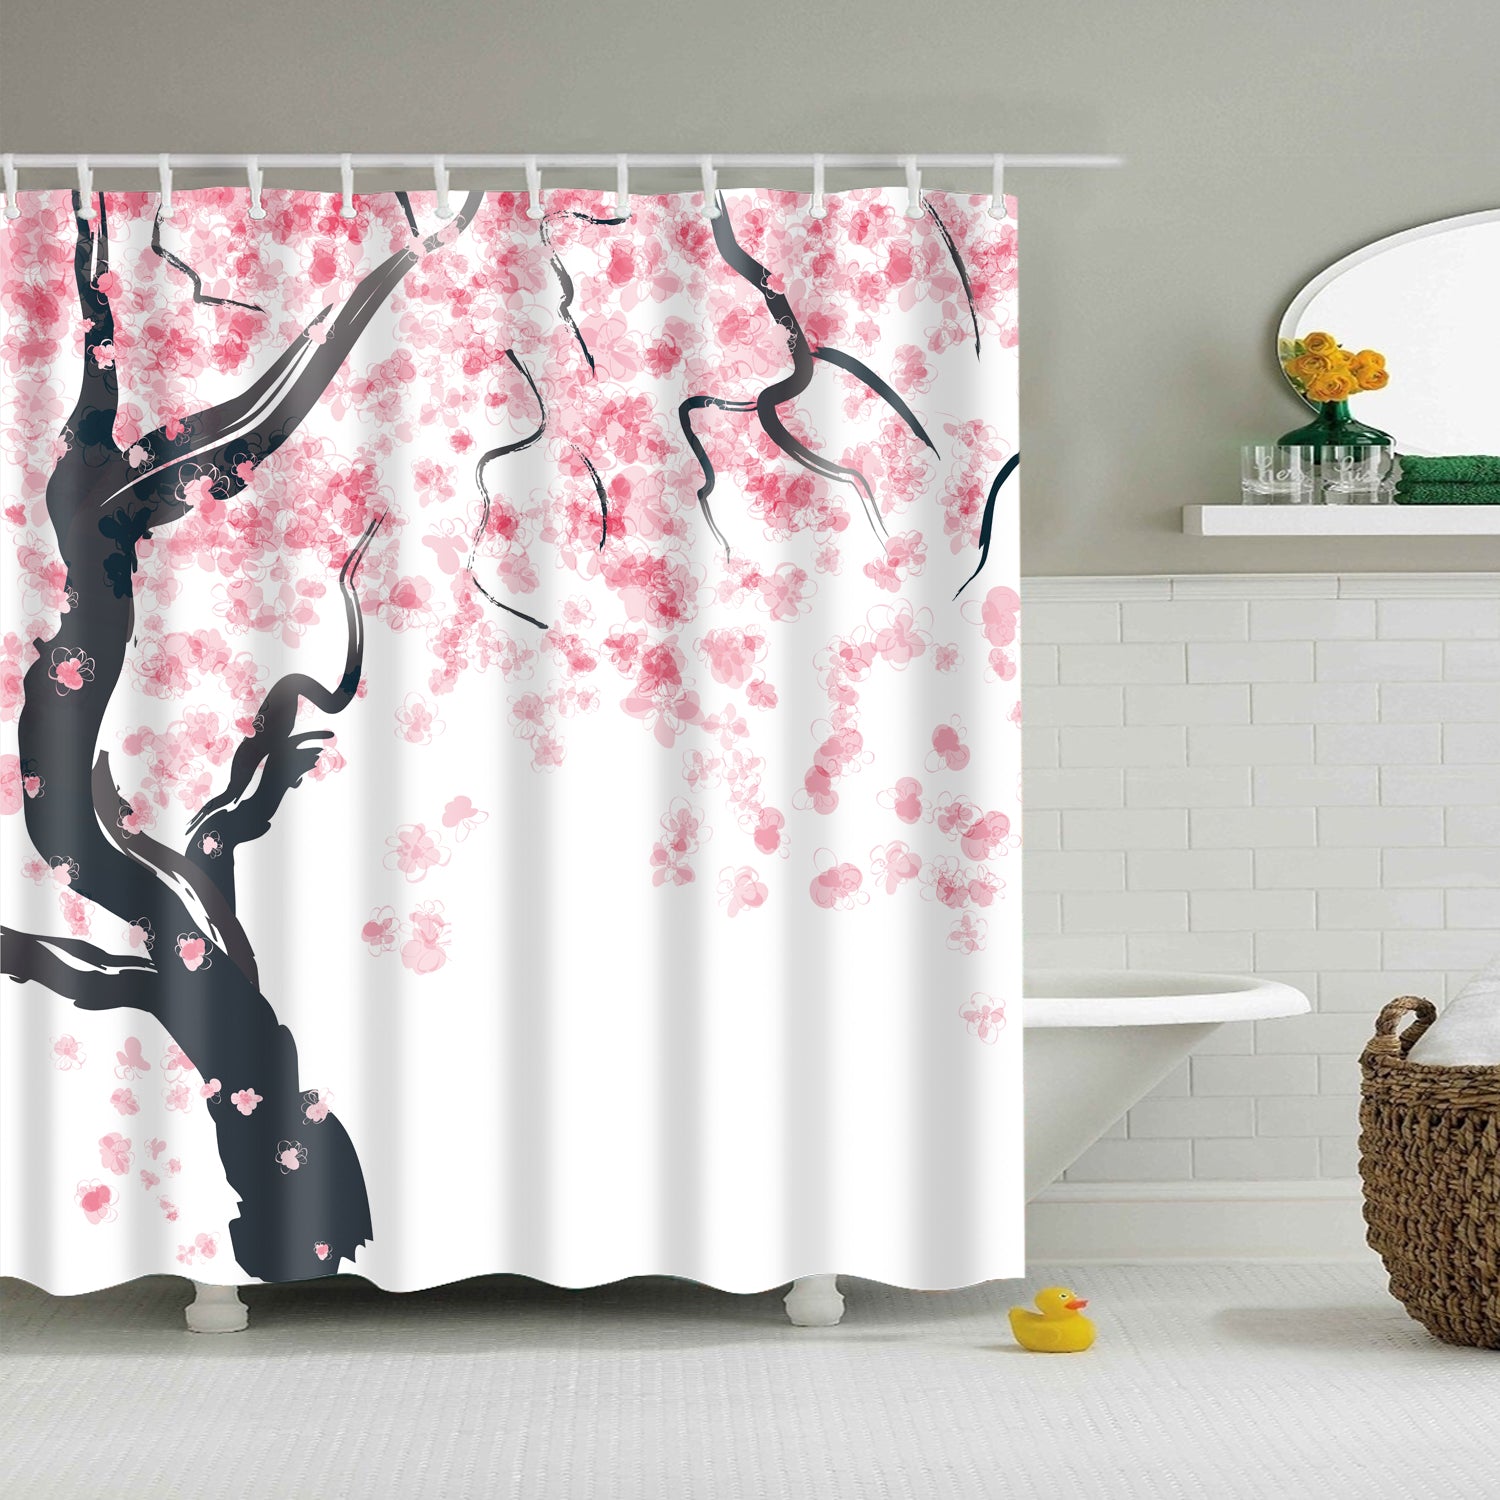 Pink Cherry Blossom Japanese Style Shower Curtain